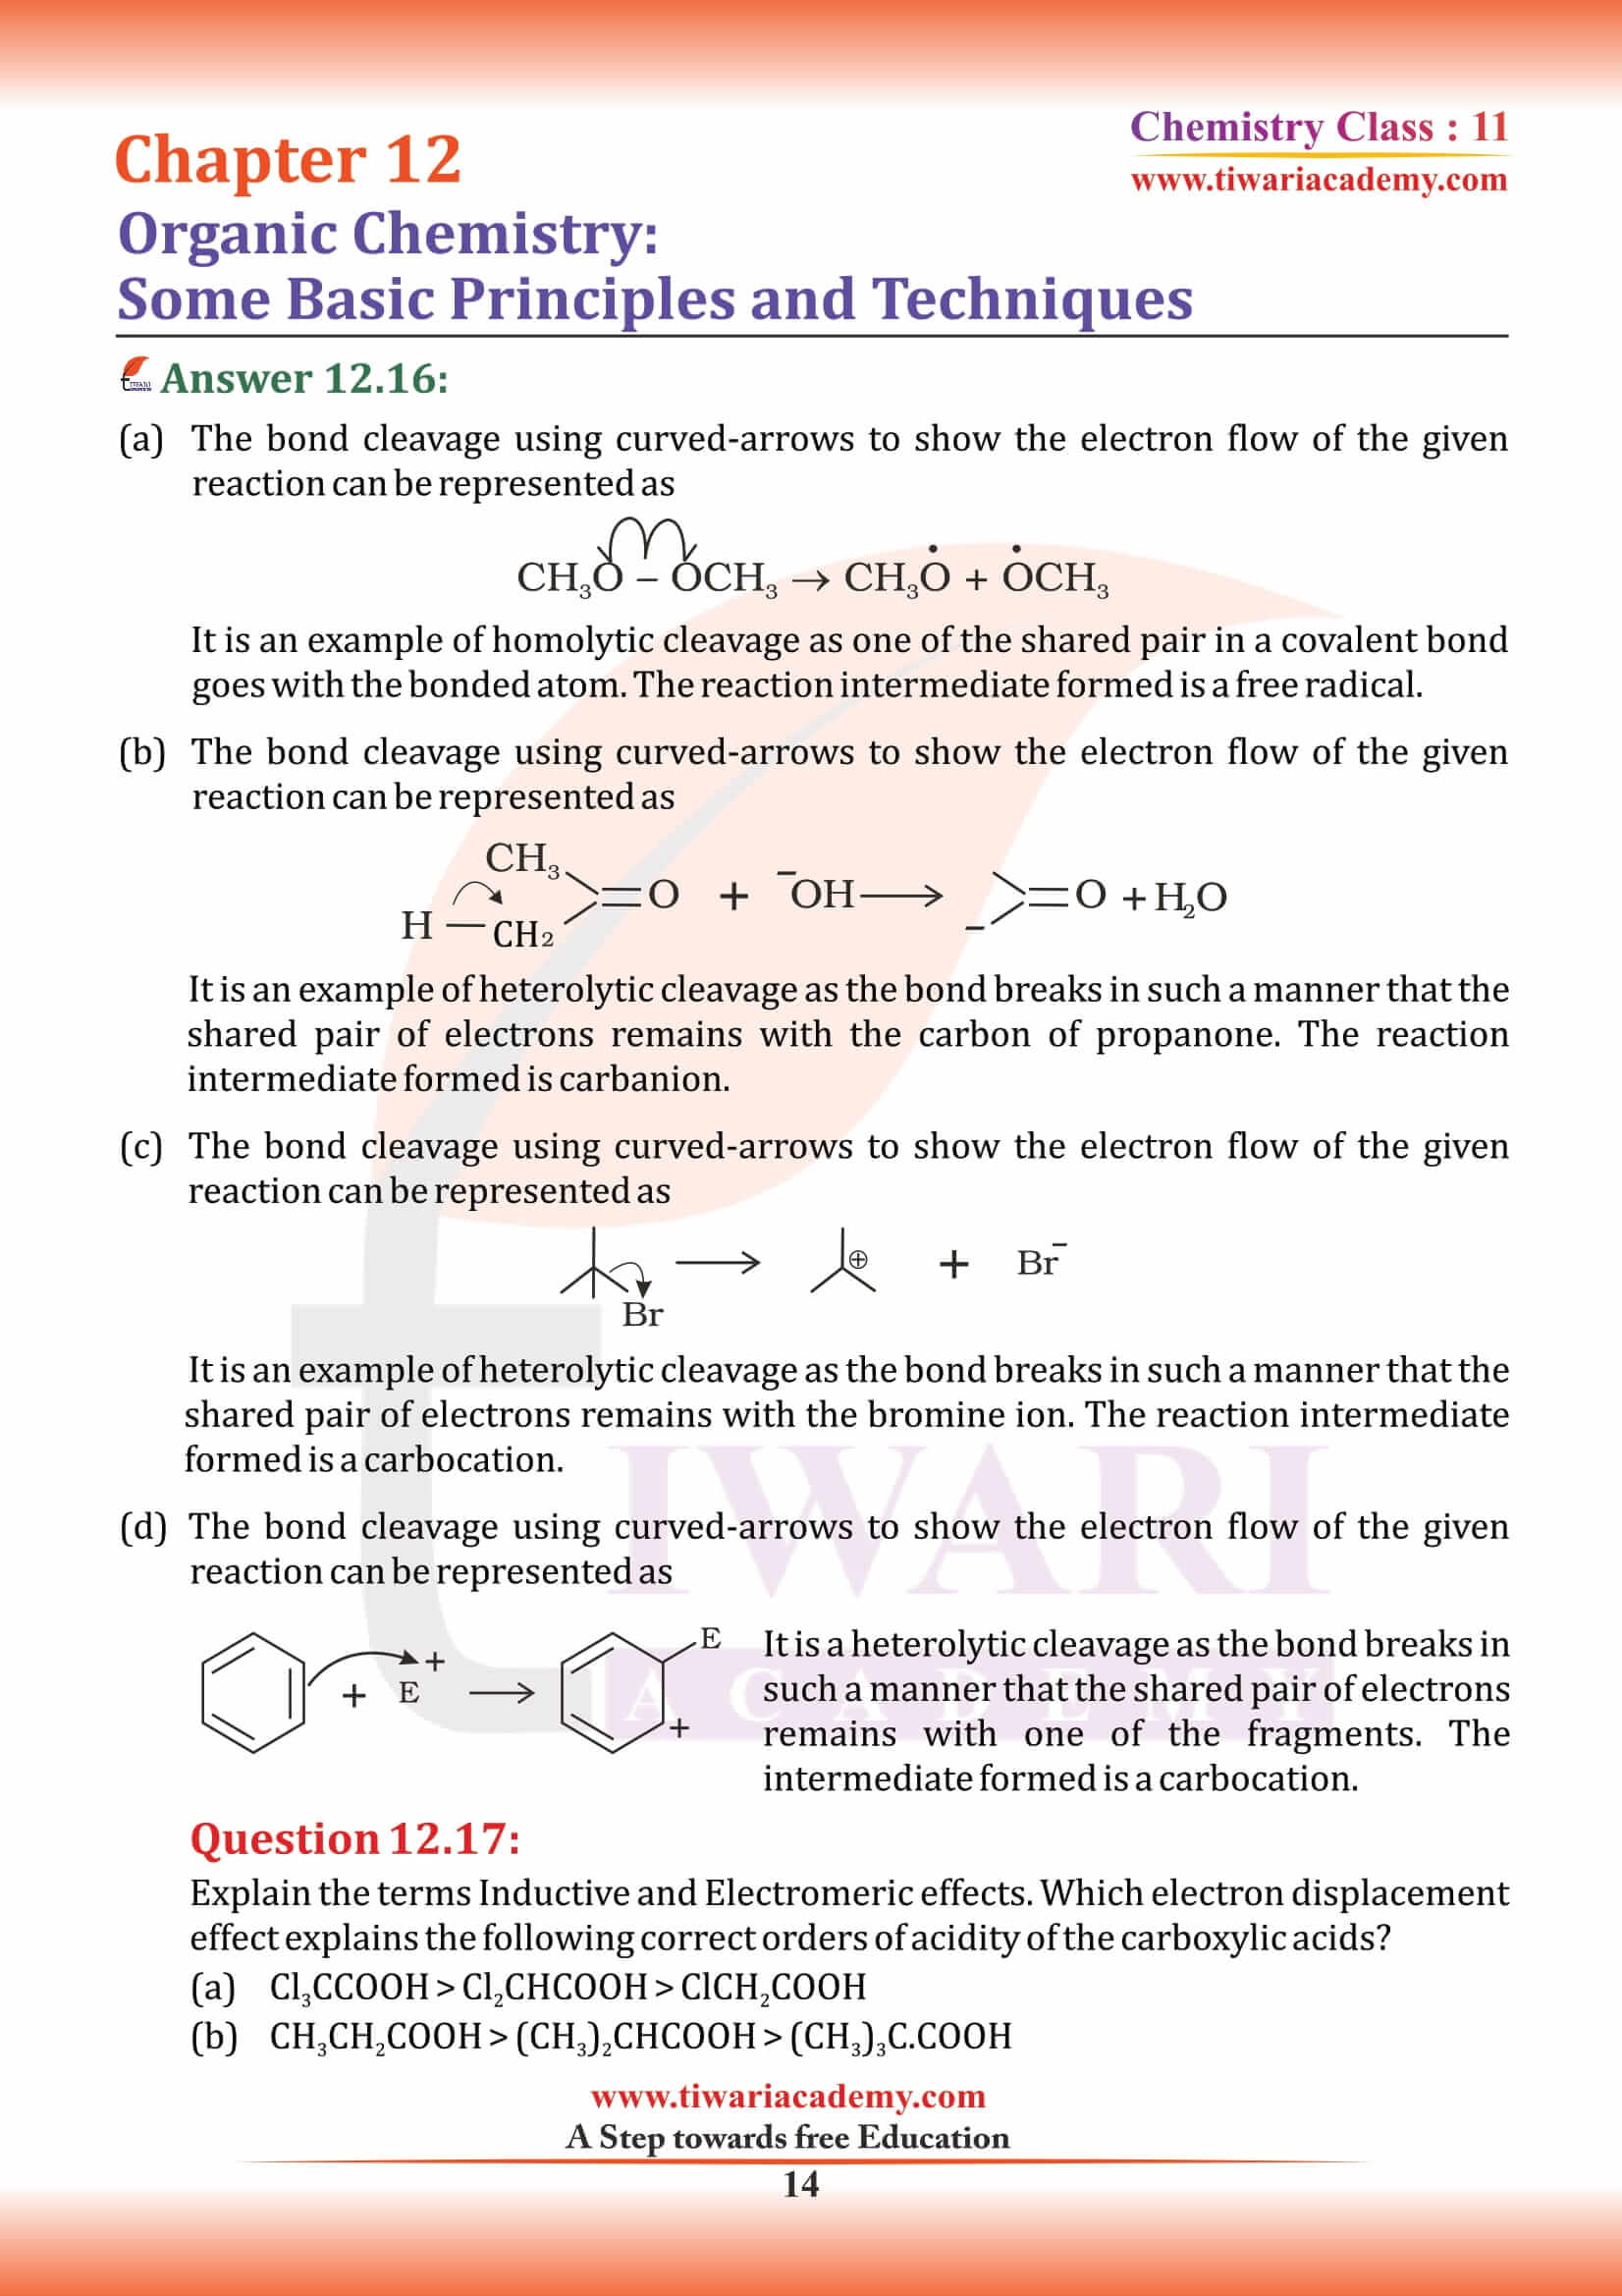 Class 11 Chemistry Chapter 12 all question answers